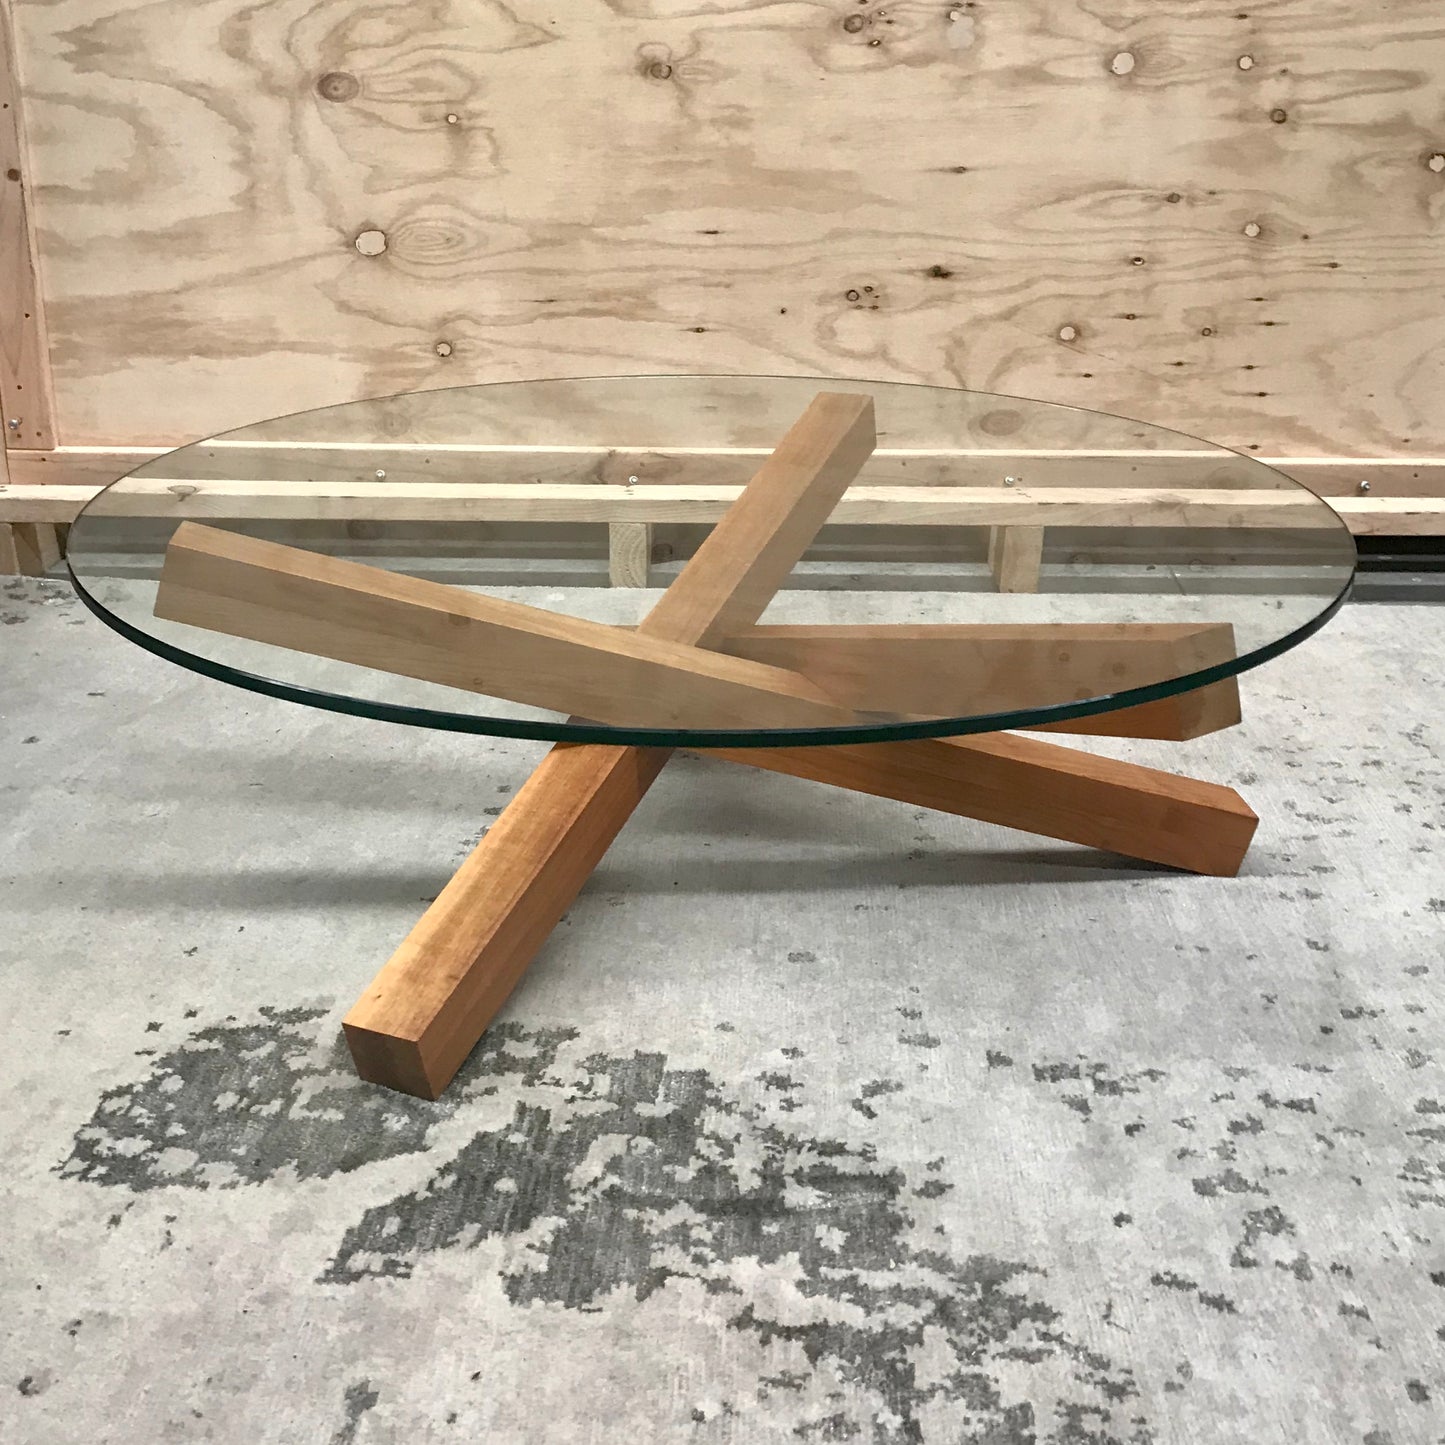 Campfire Coffee Table by Tomek Archer for Tomahawk Studio